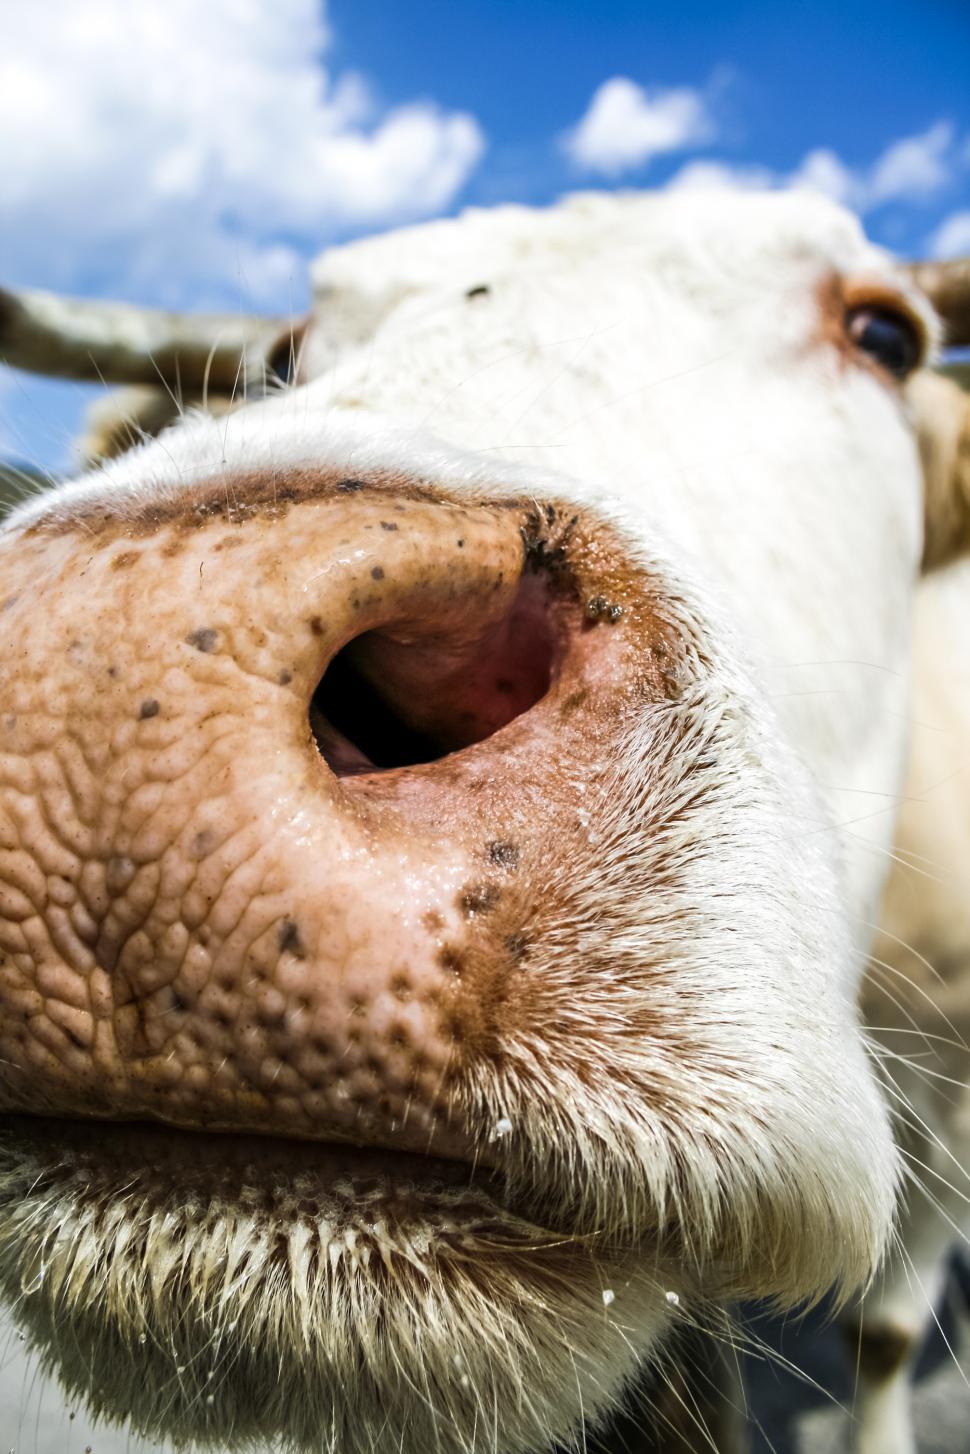 Free Image of cow muzzle close up 